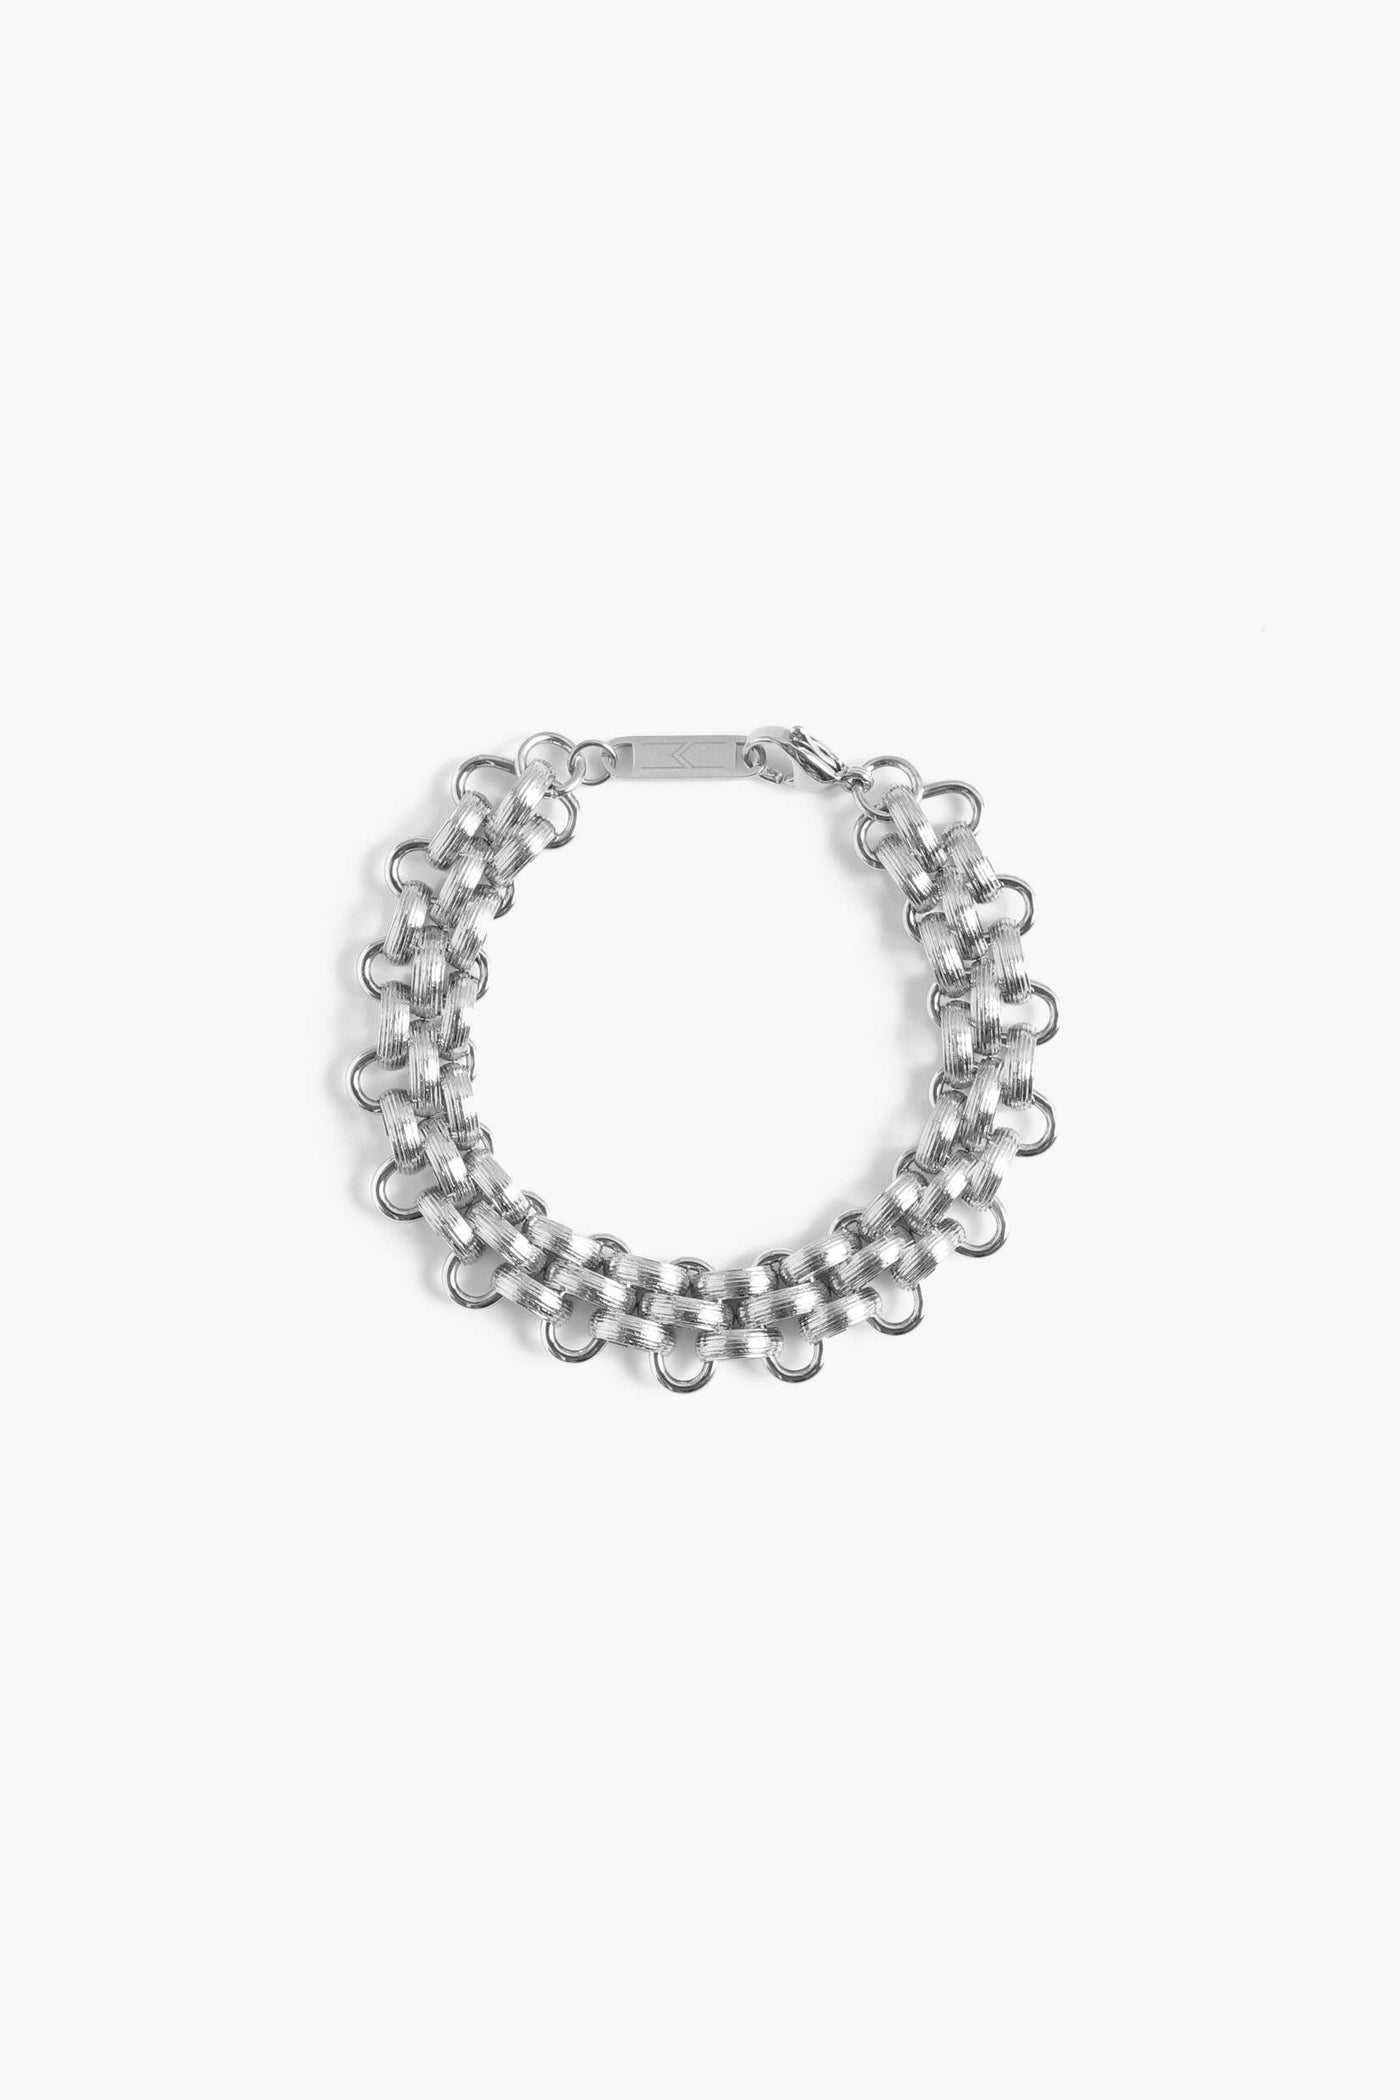 Marrin Costello Jewelry Lattice XL Bracelet woven chain bracelet with lobster clasp closure. Waterproof, sustainable, hypoallergenic. Polished stainless steel.